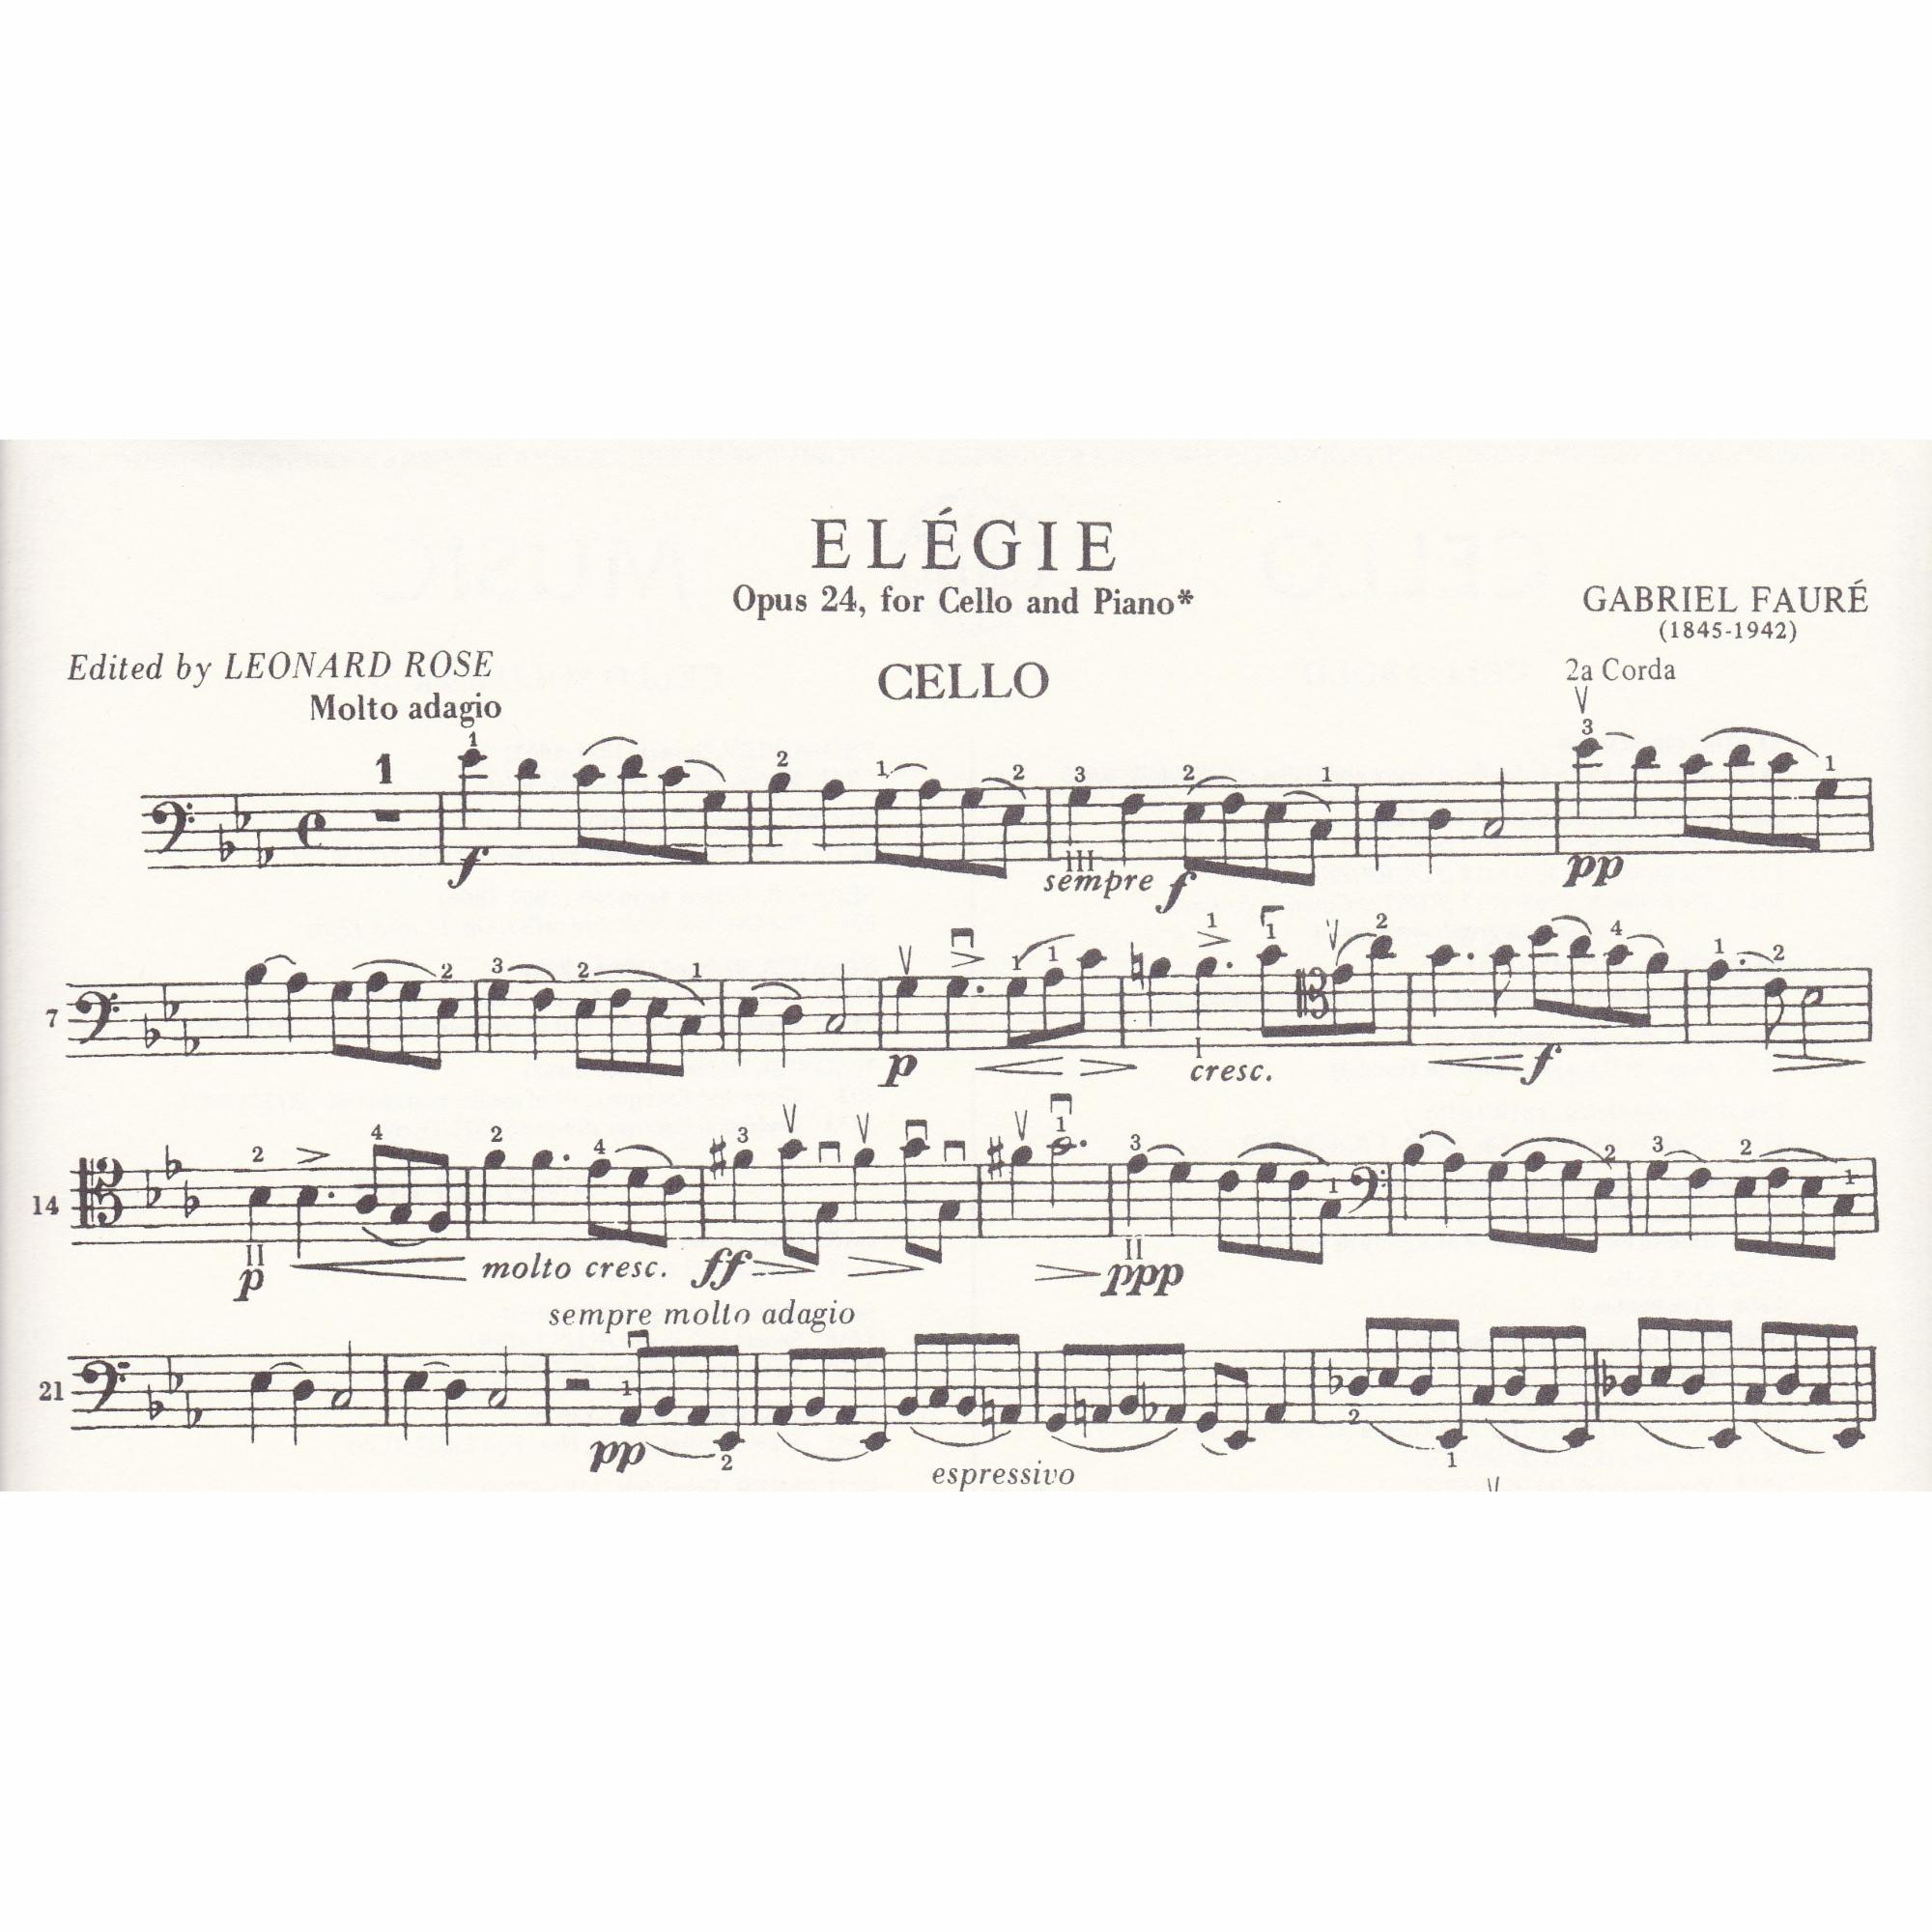 Elegy for Cello and Piano, Op. 24